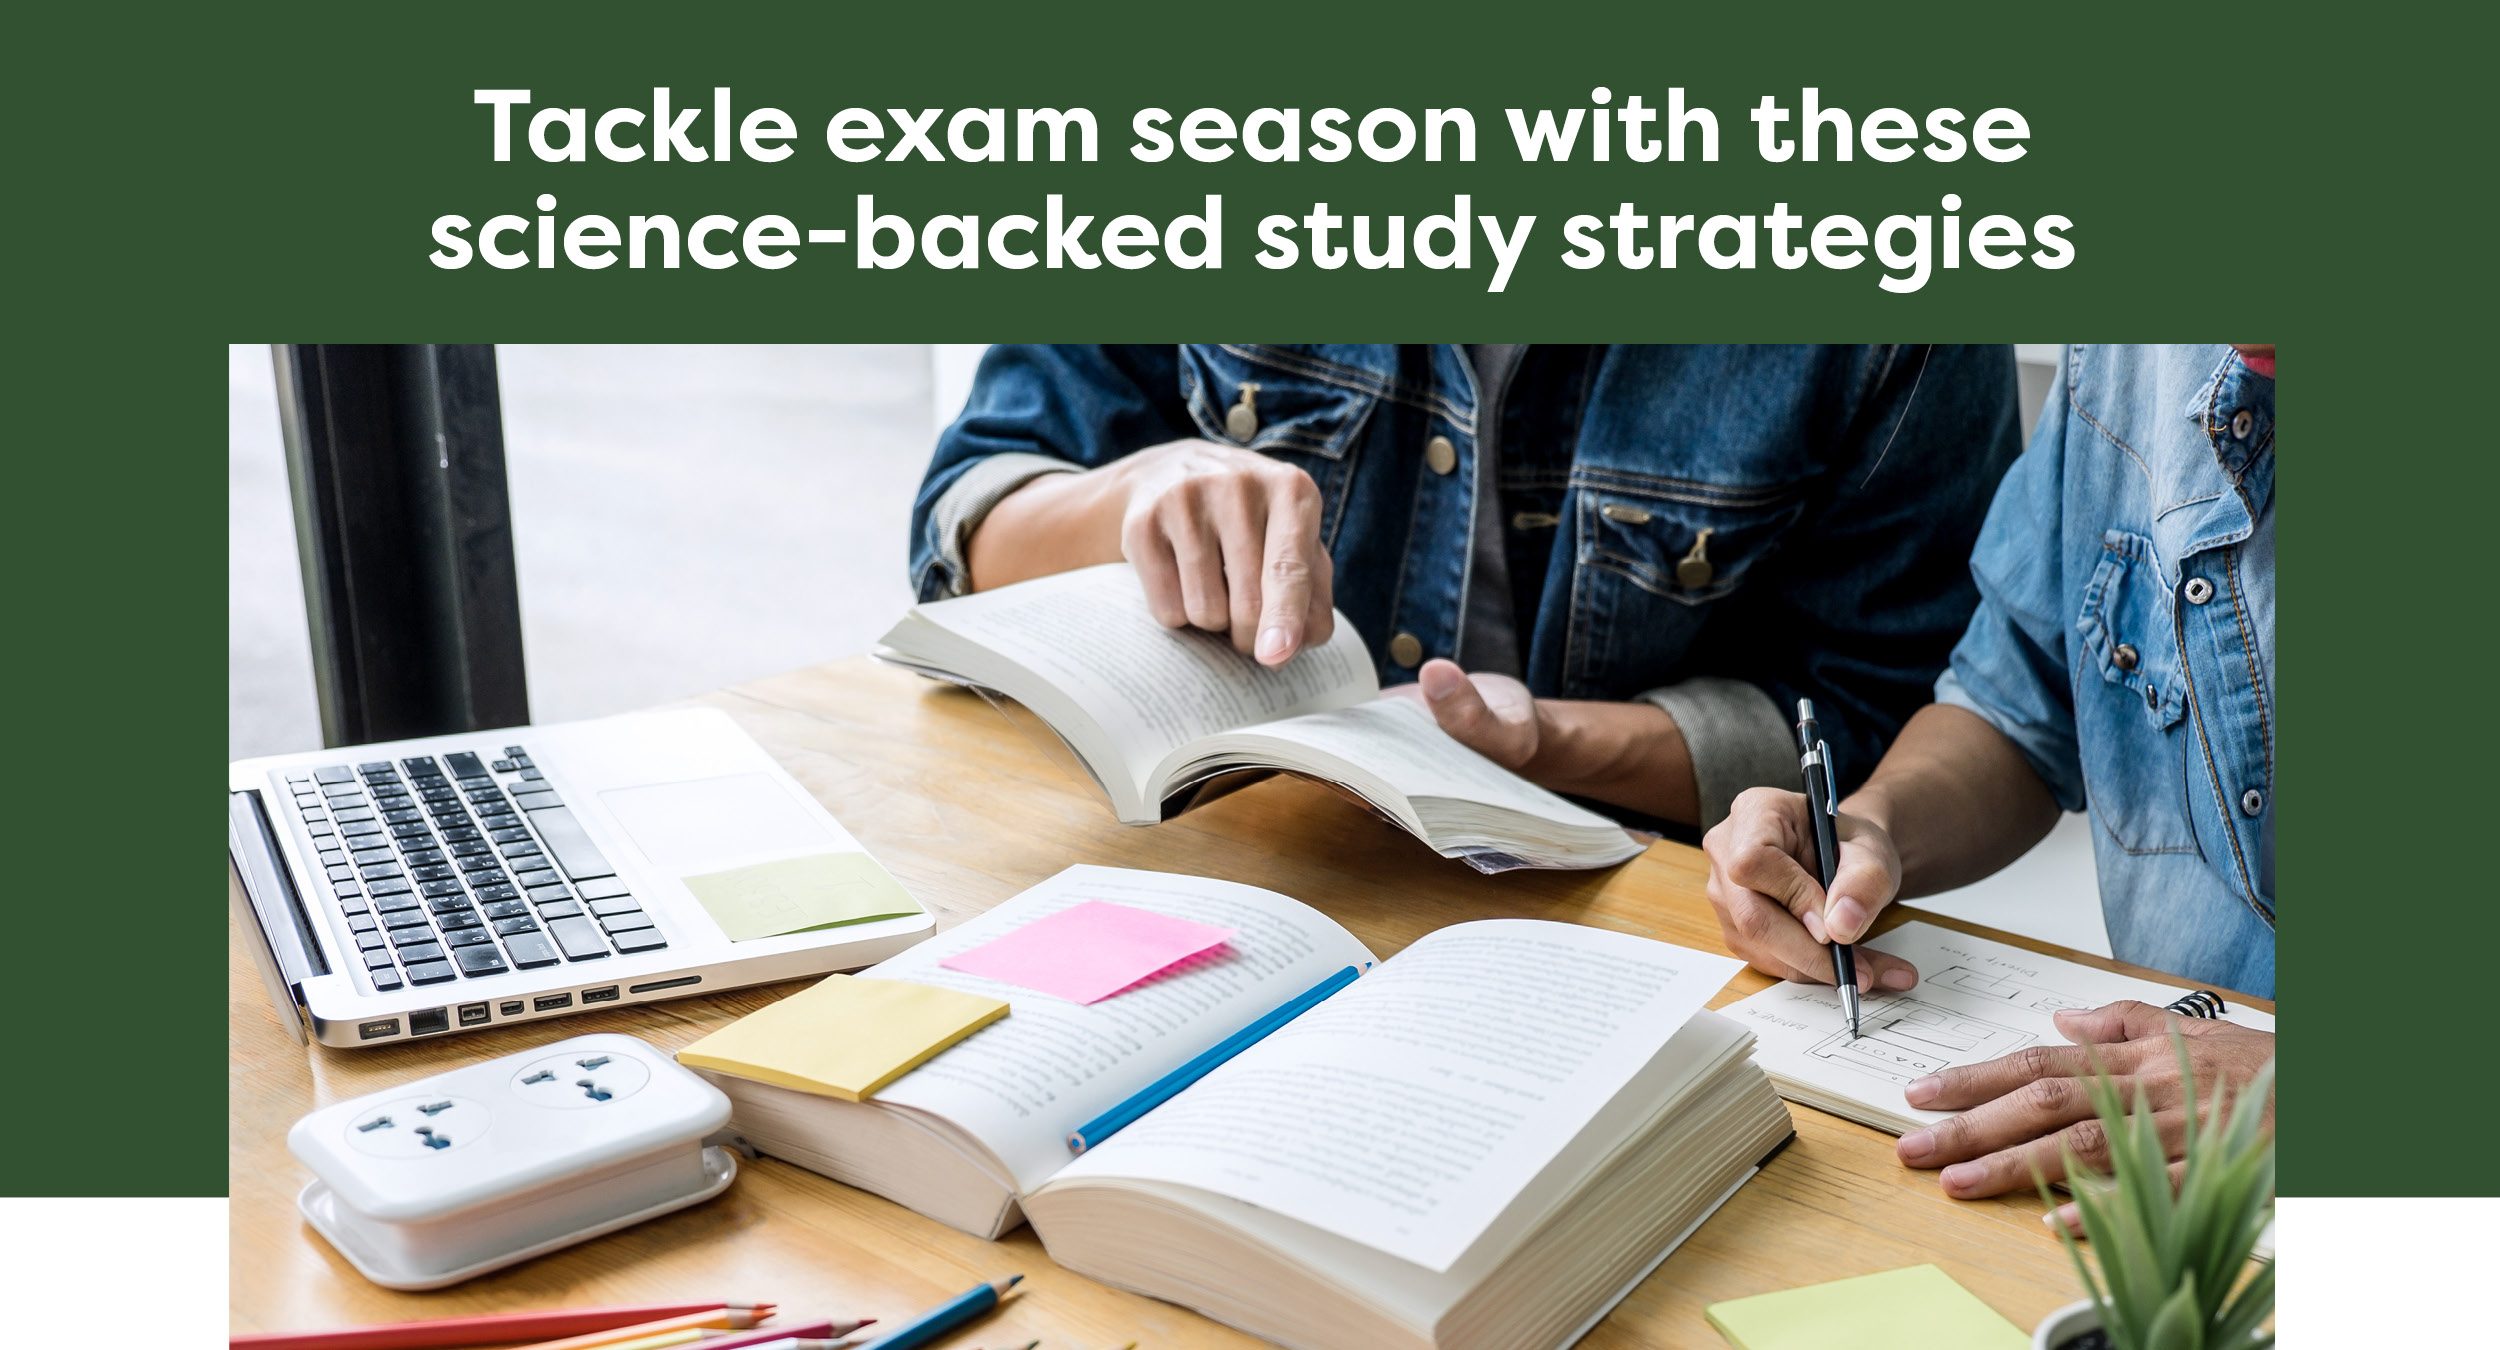 Tackle exam season with these science-backed study strategies